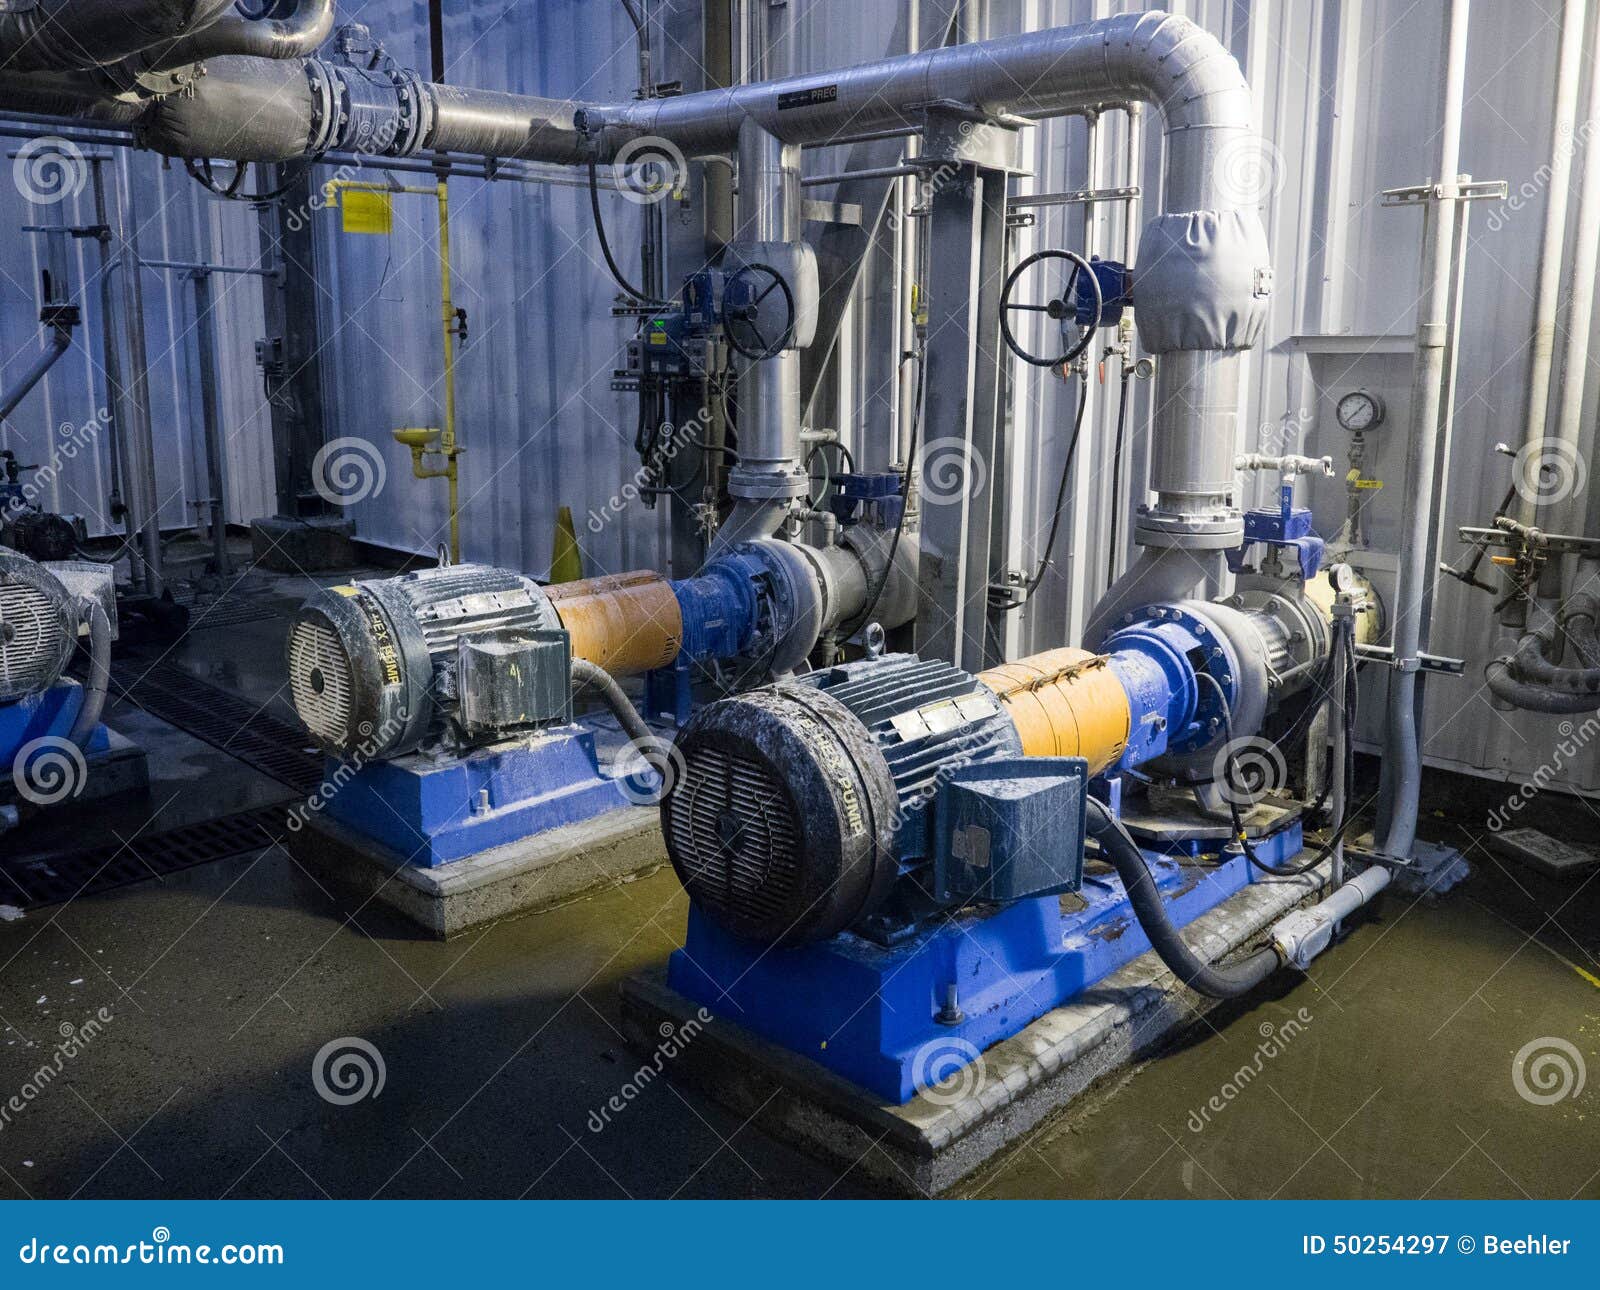 industrial pumps and pipes